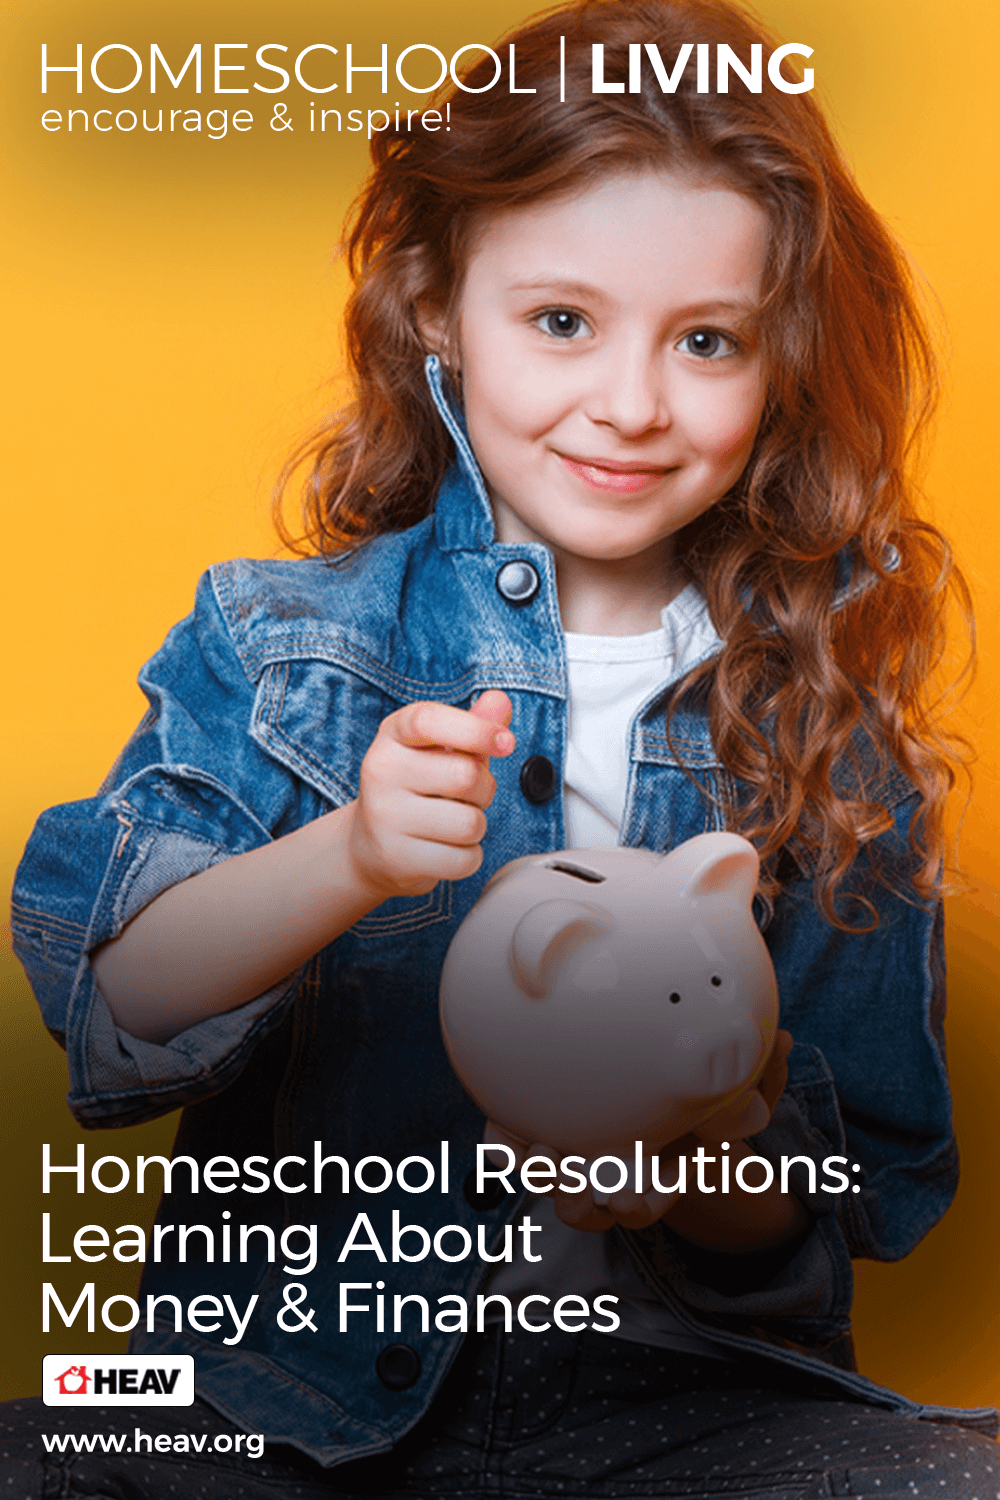 Homeschool Resolutions: Learning About Money & Finances 2